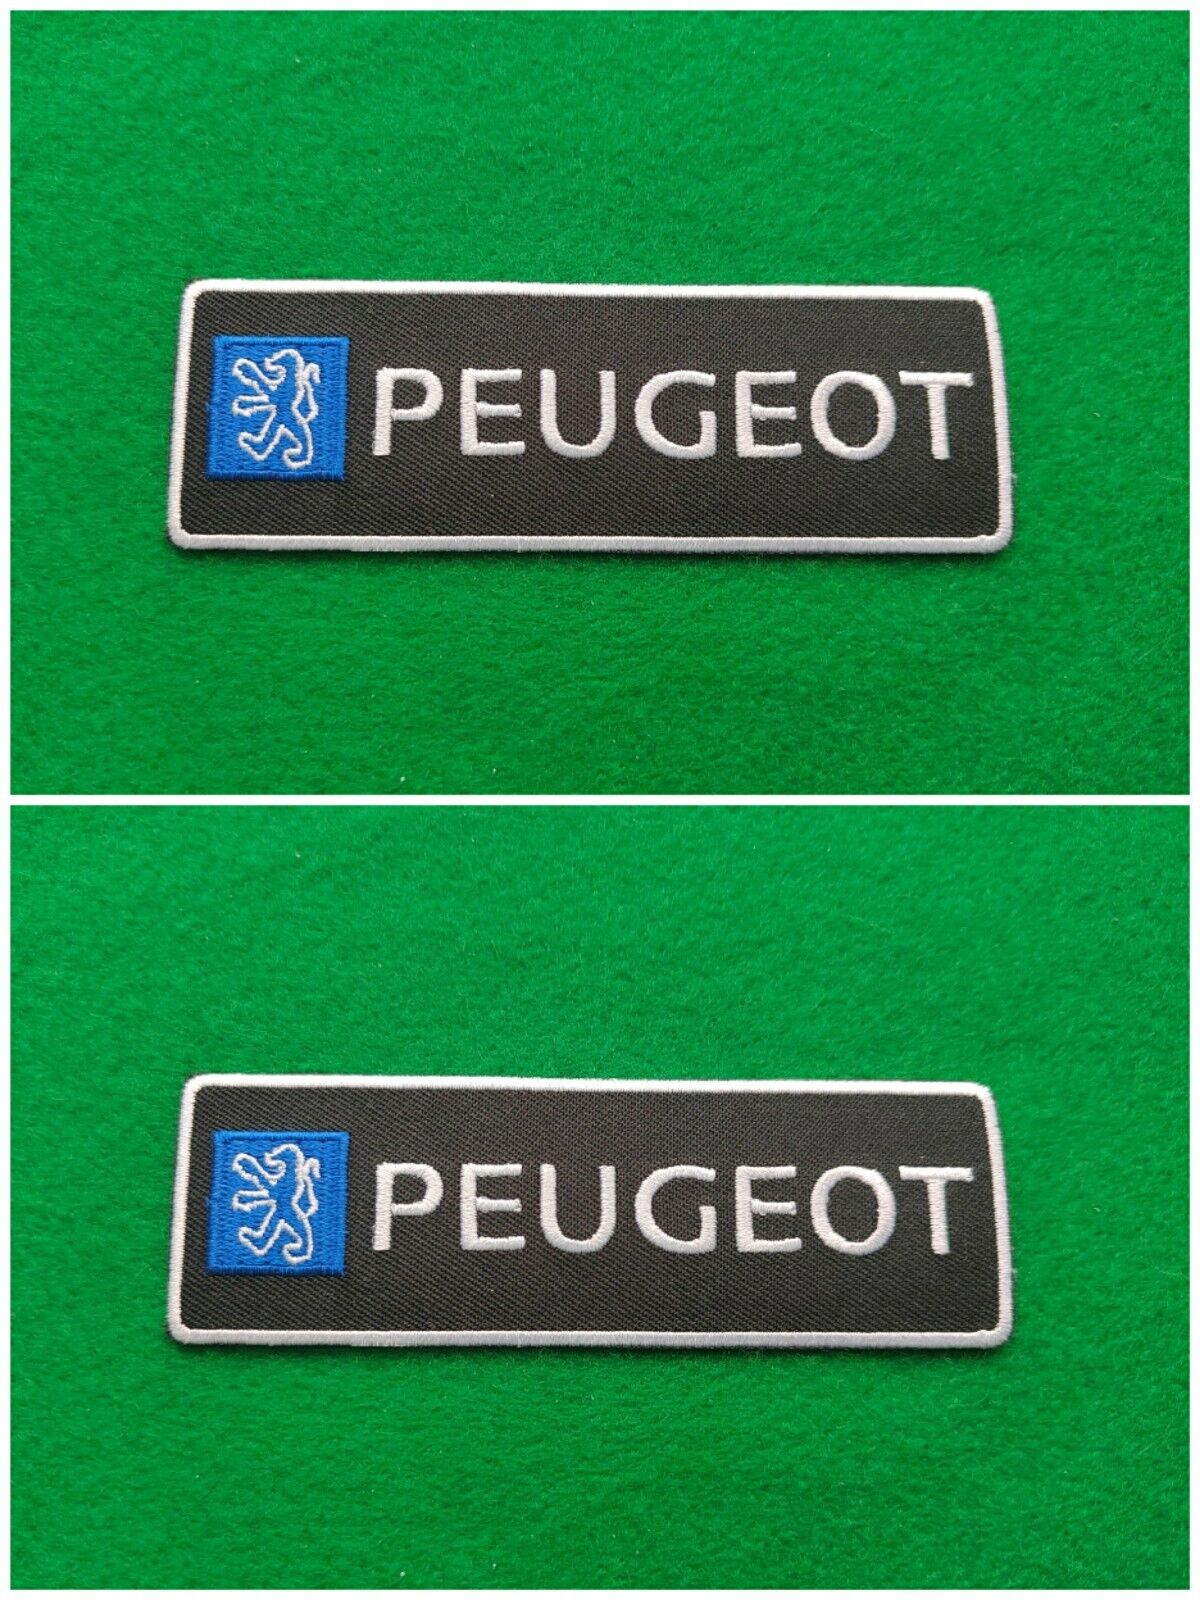 A Pair Of 2 Peugeot Motor Racing Car Motorsport Badges Sew / Iron On Patch